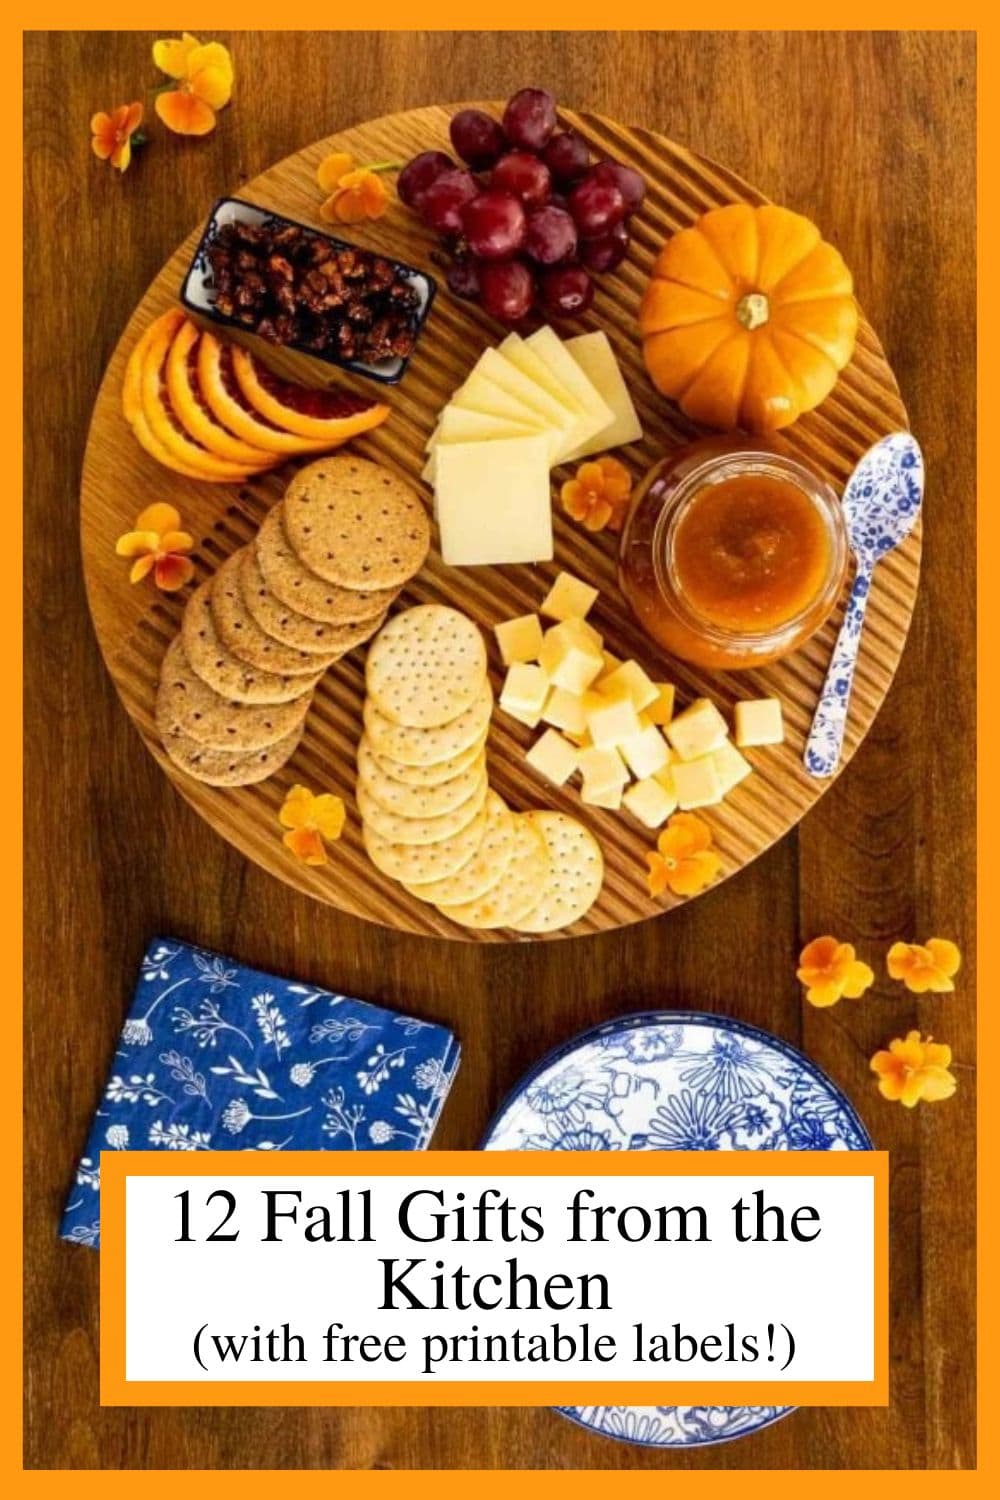 Gifts from the Kitchen -12 Easy, Seasonal Recipes (with free printable labels!)